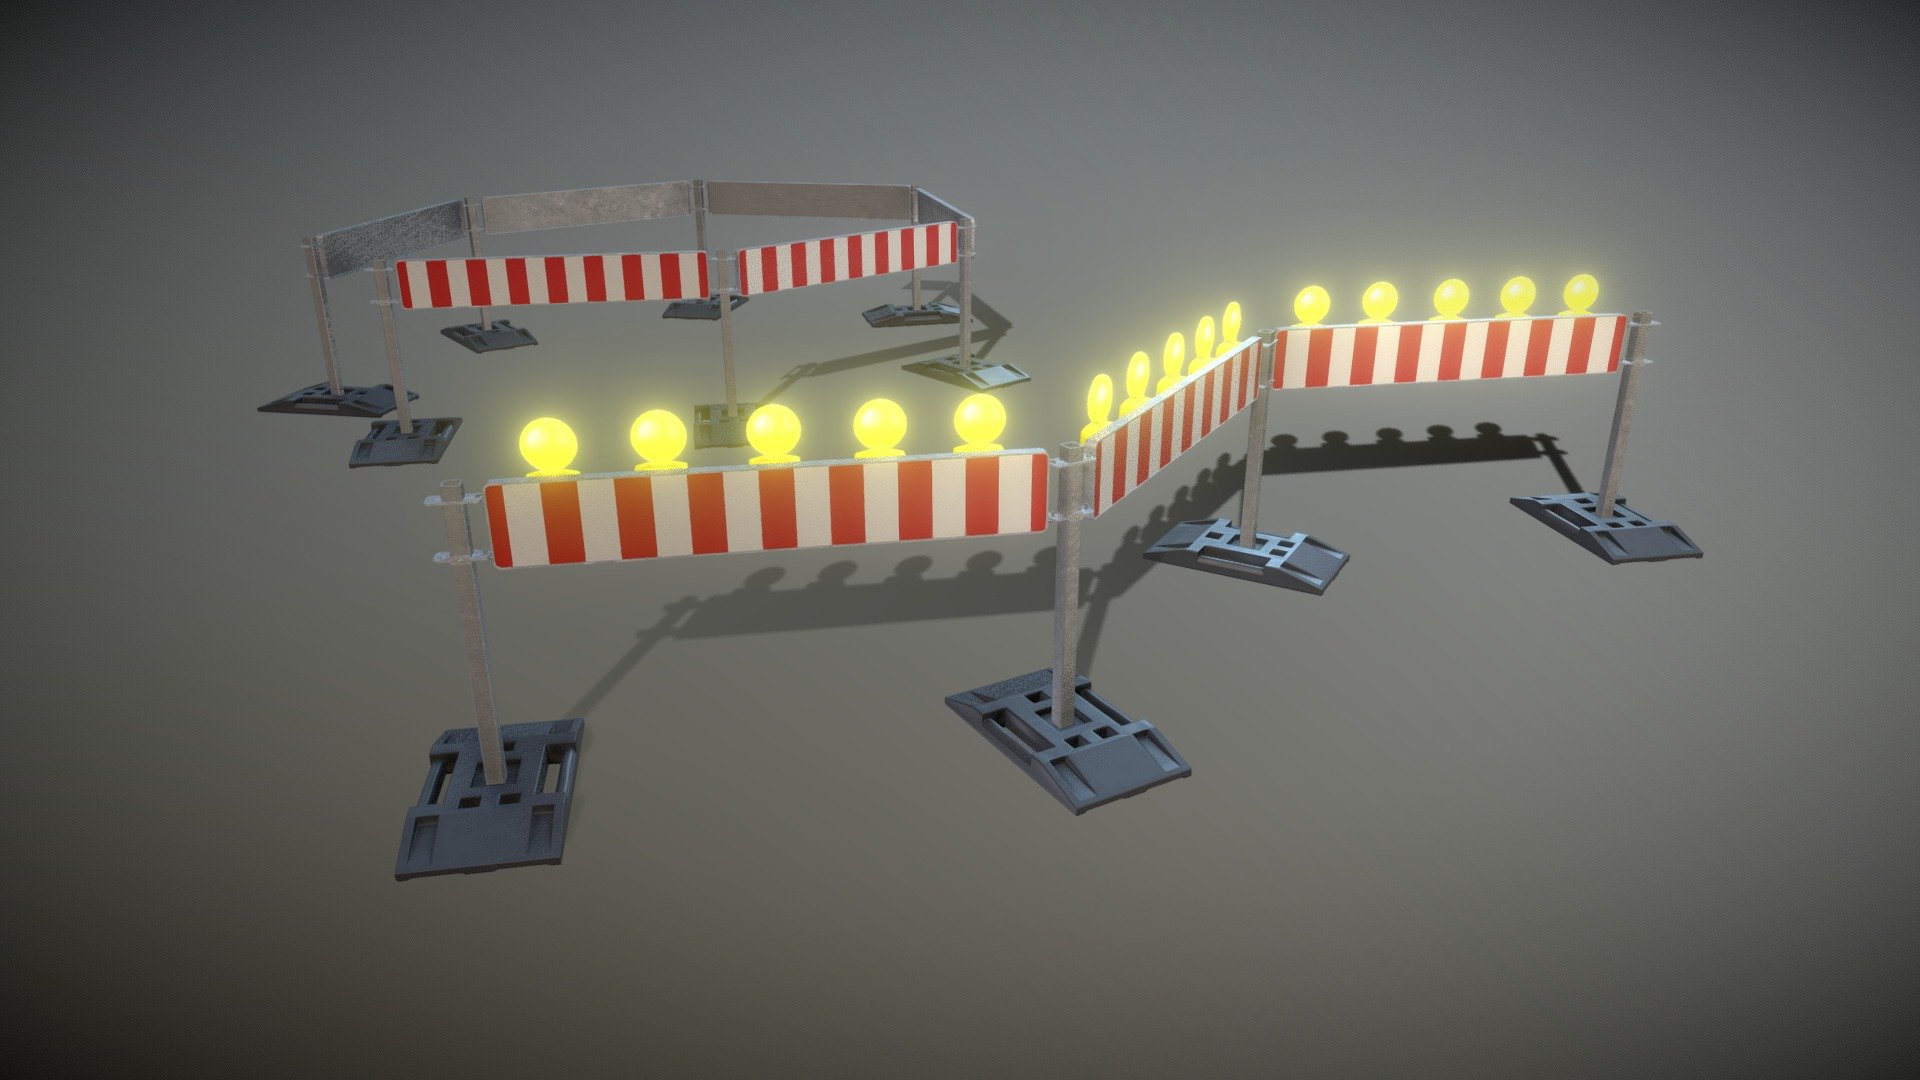 Construction Site Barriers (WIP-1)